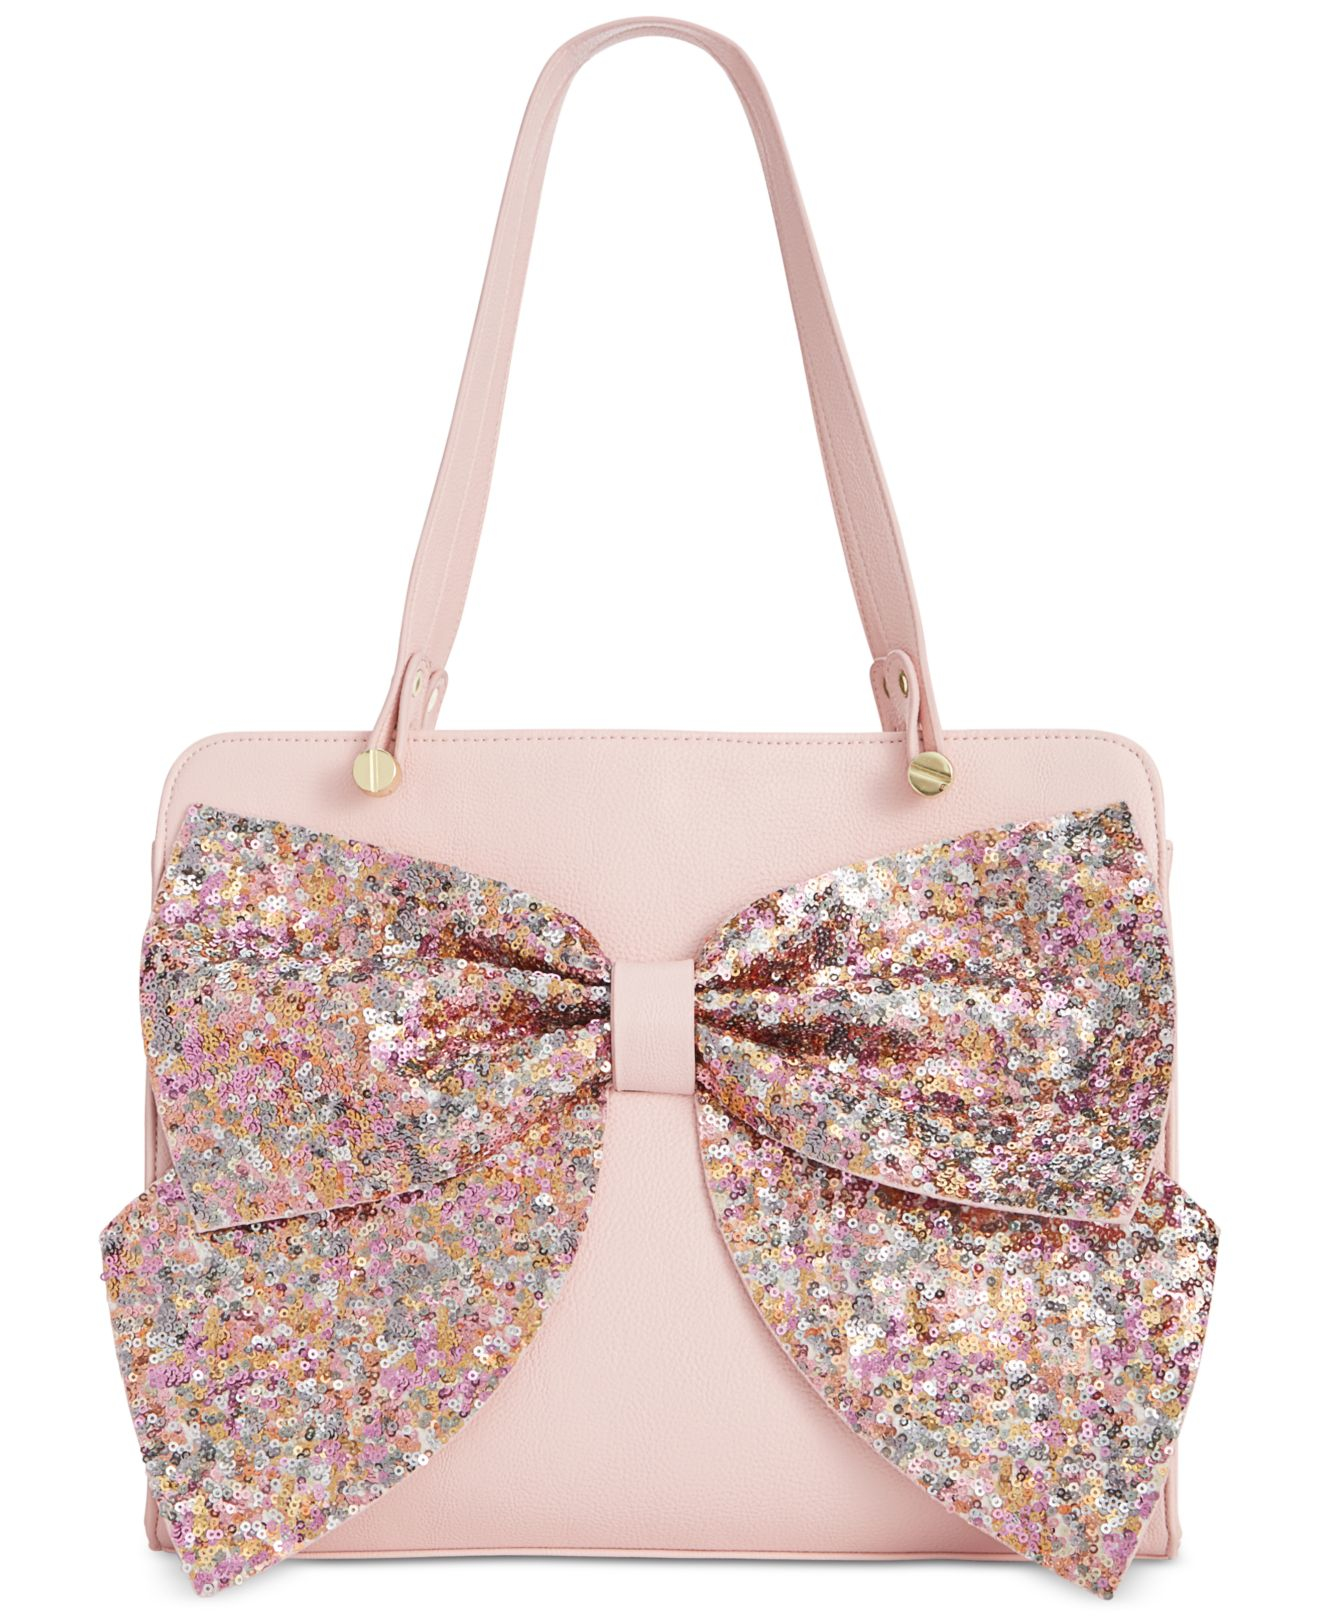 Lyst - Betsey Johnson Macy's Exclusive Sequin Bow Satchel in Pink